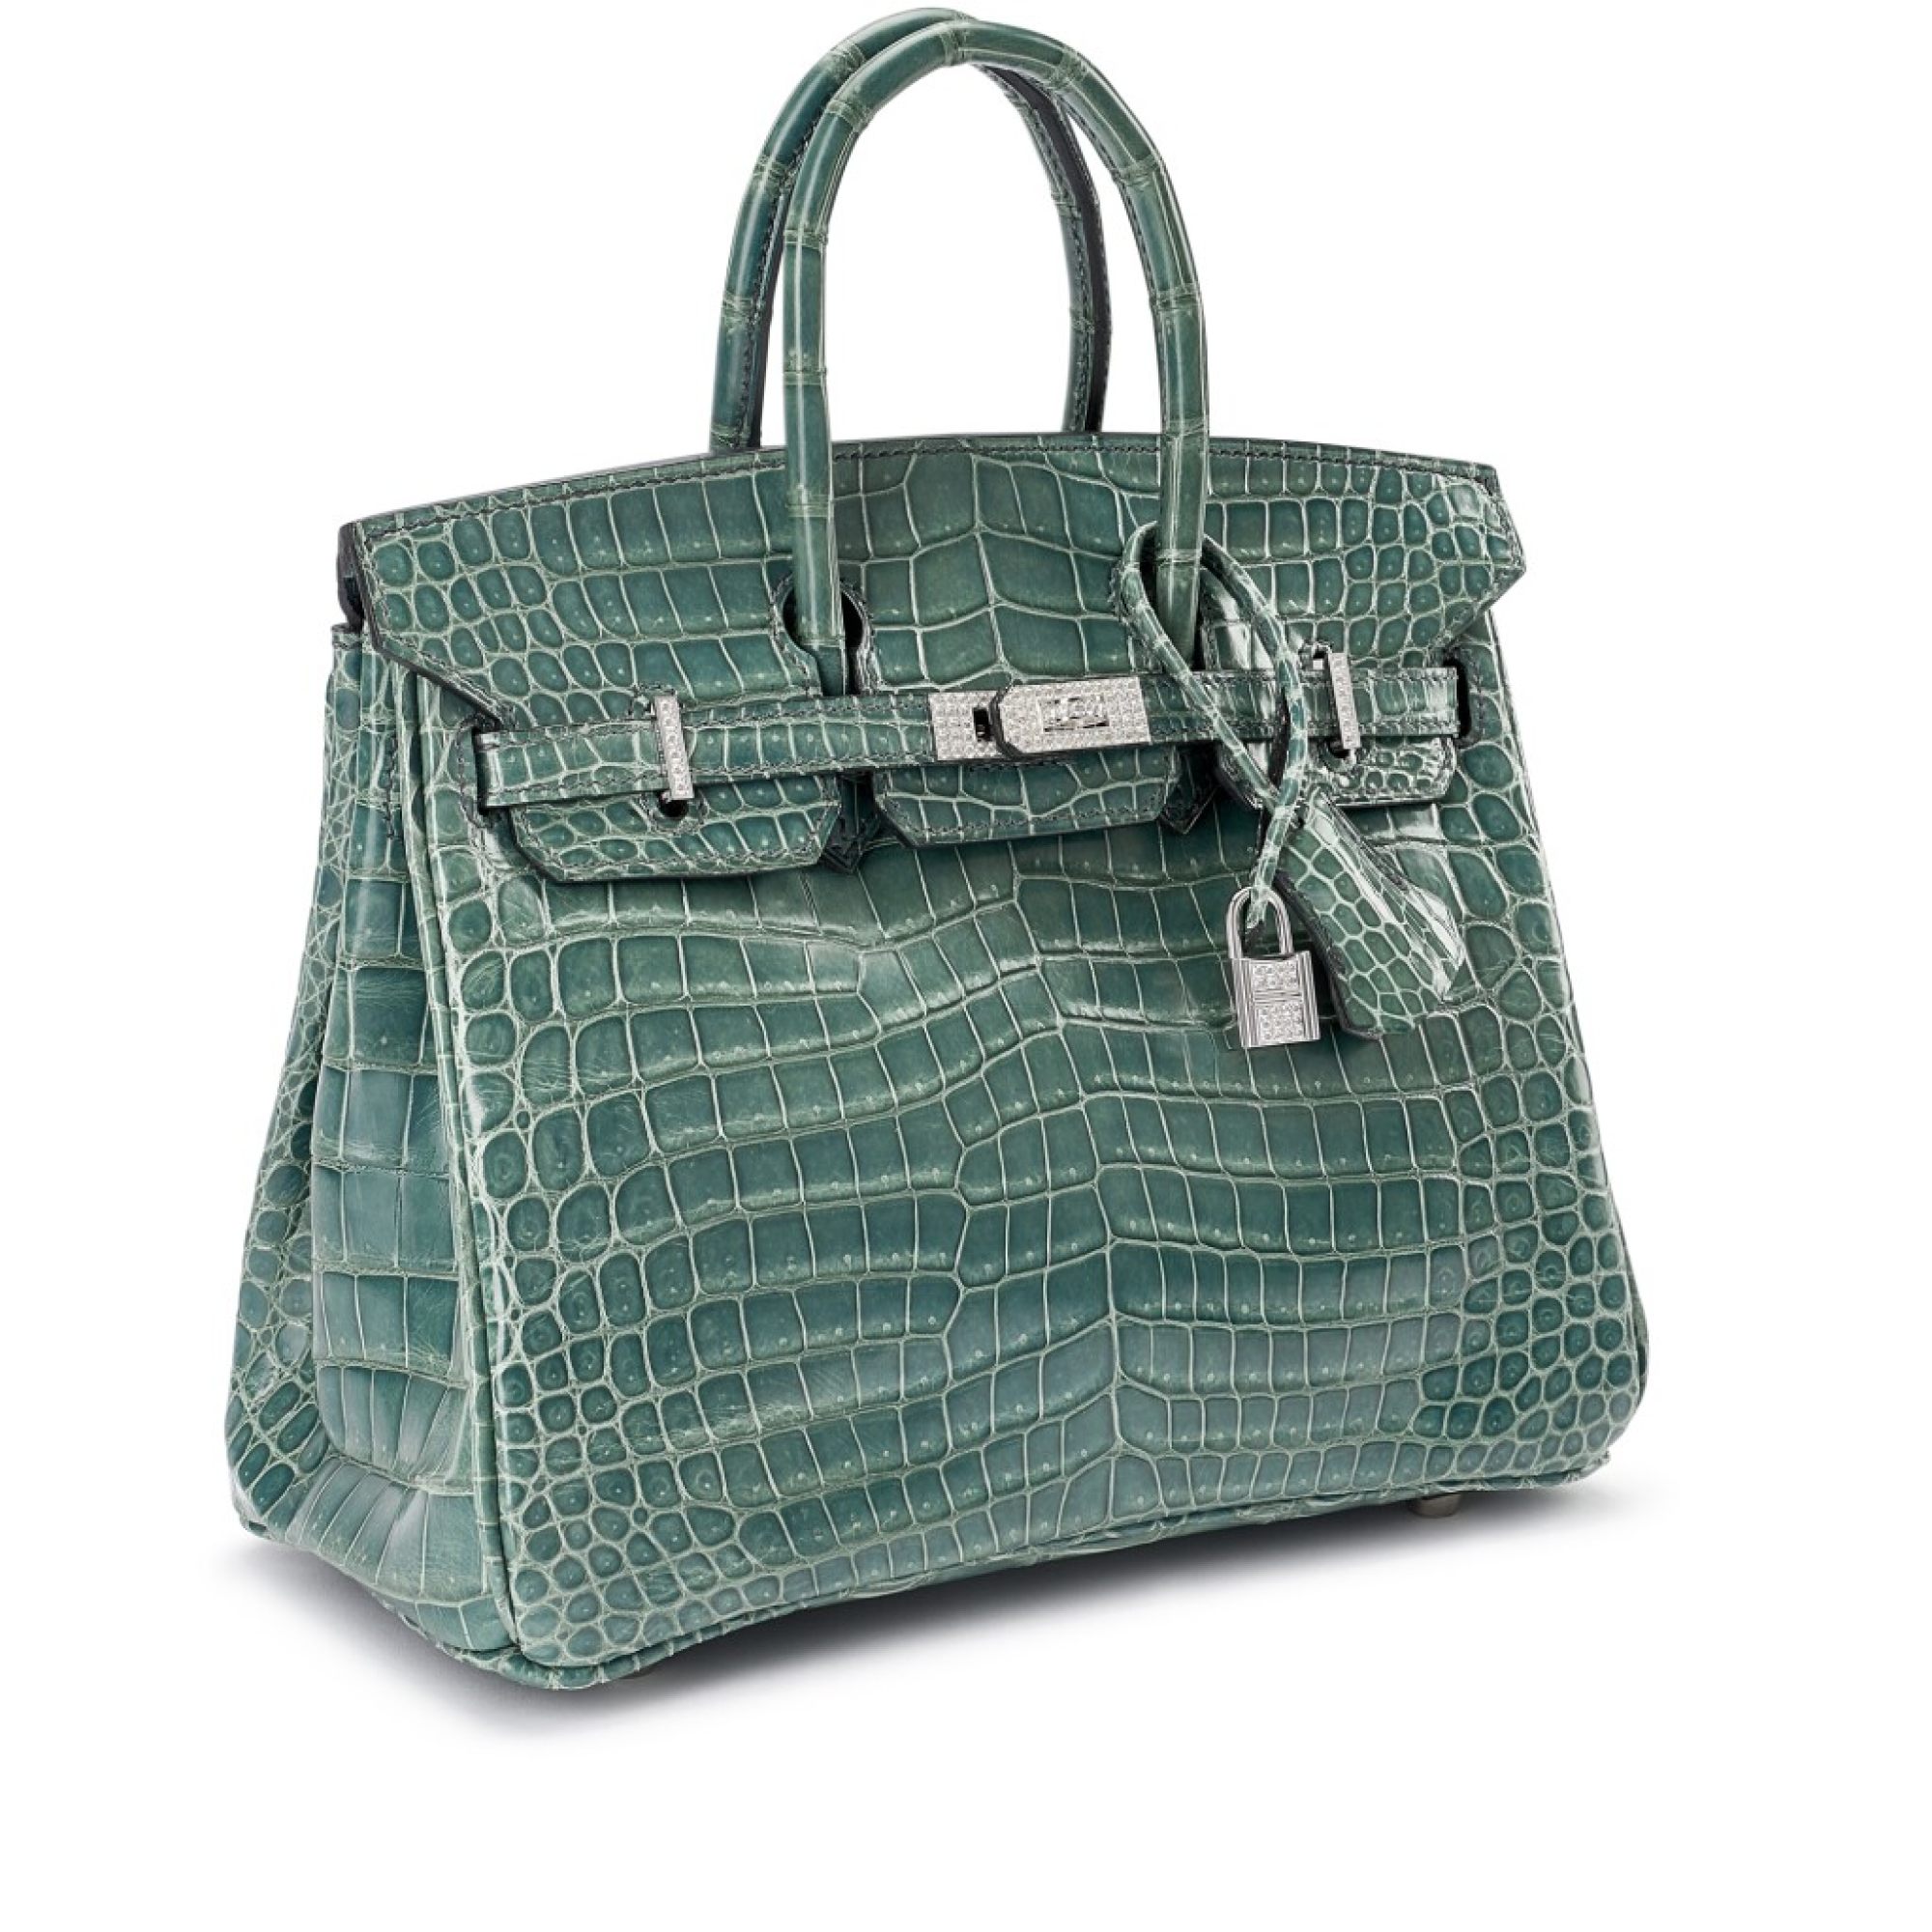 World's most expensive handbag sells in Hong Kong for over US